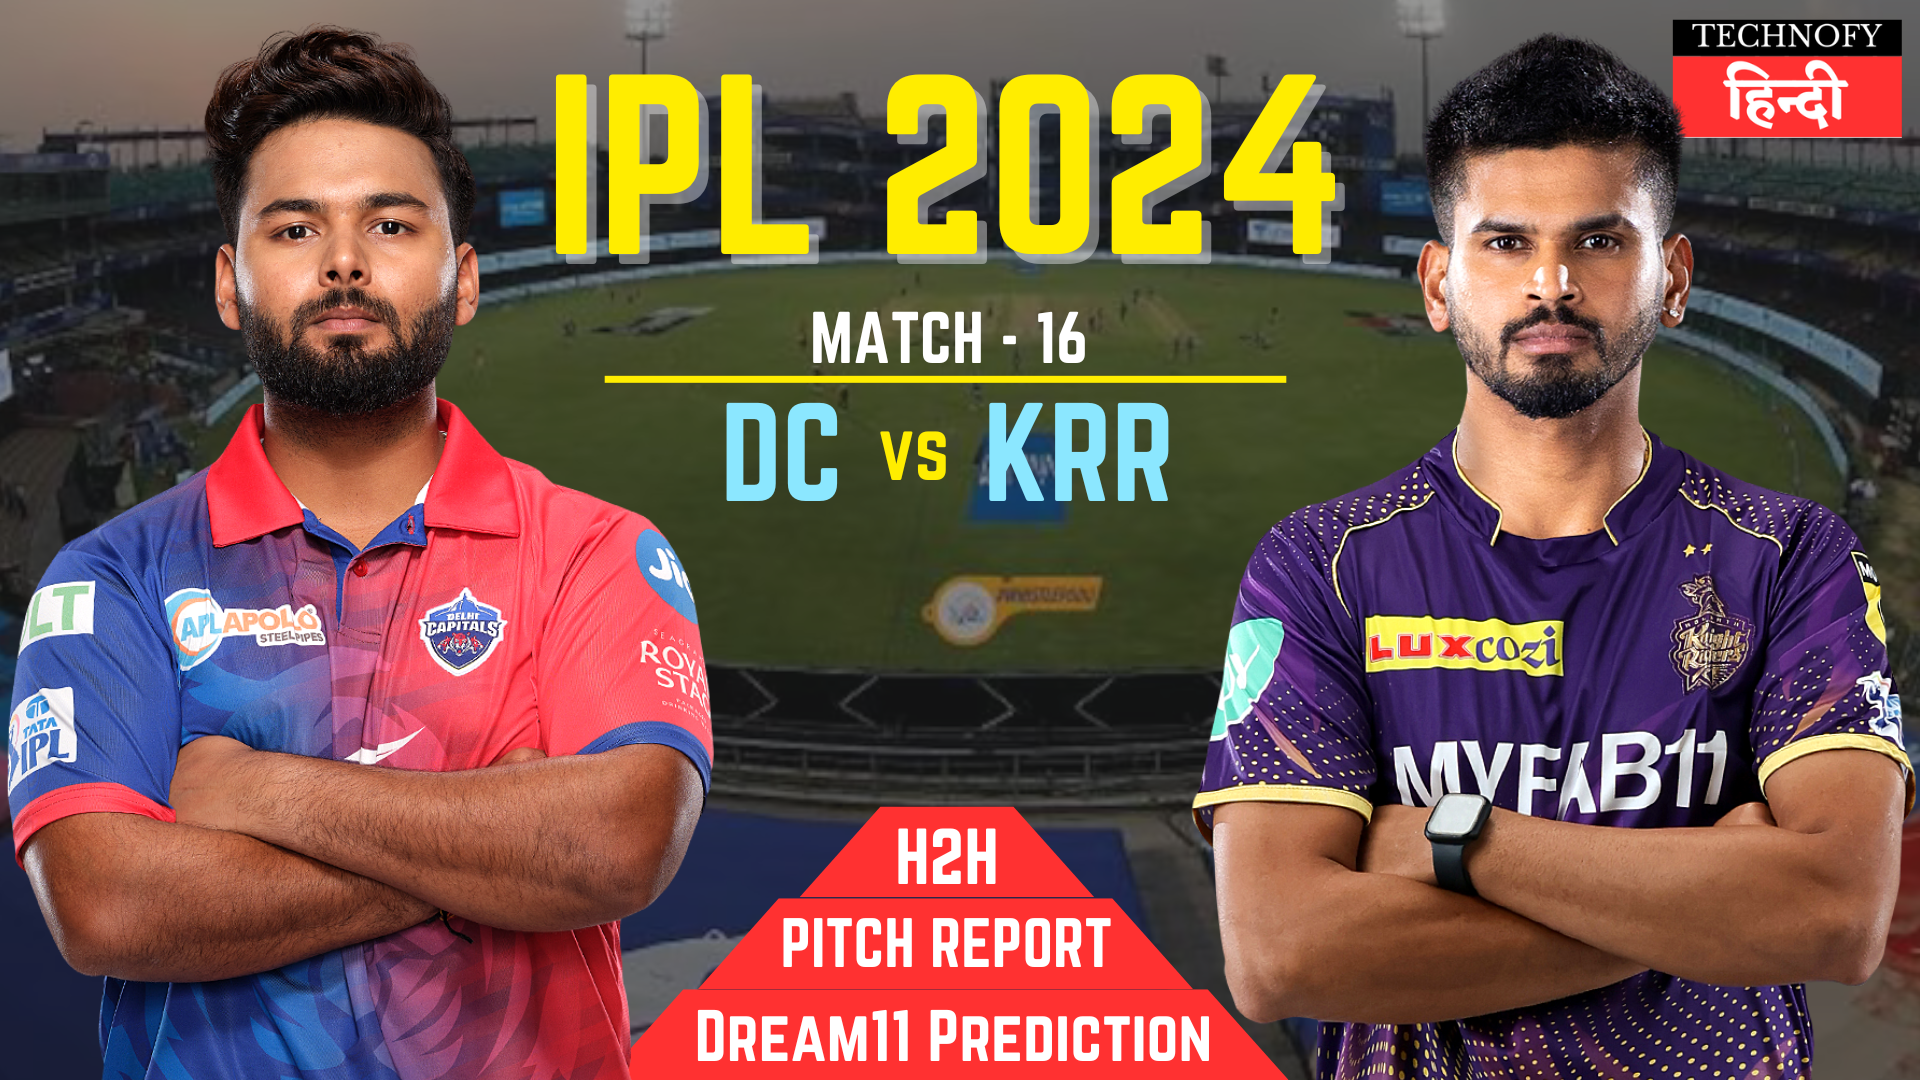 DC vs KRR Dream11 Prediction, Playing XI or Pitch Report